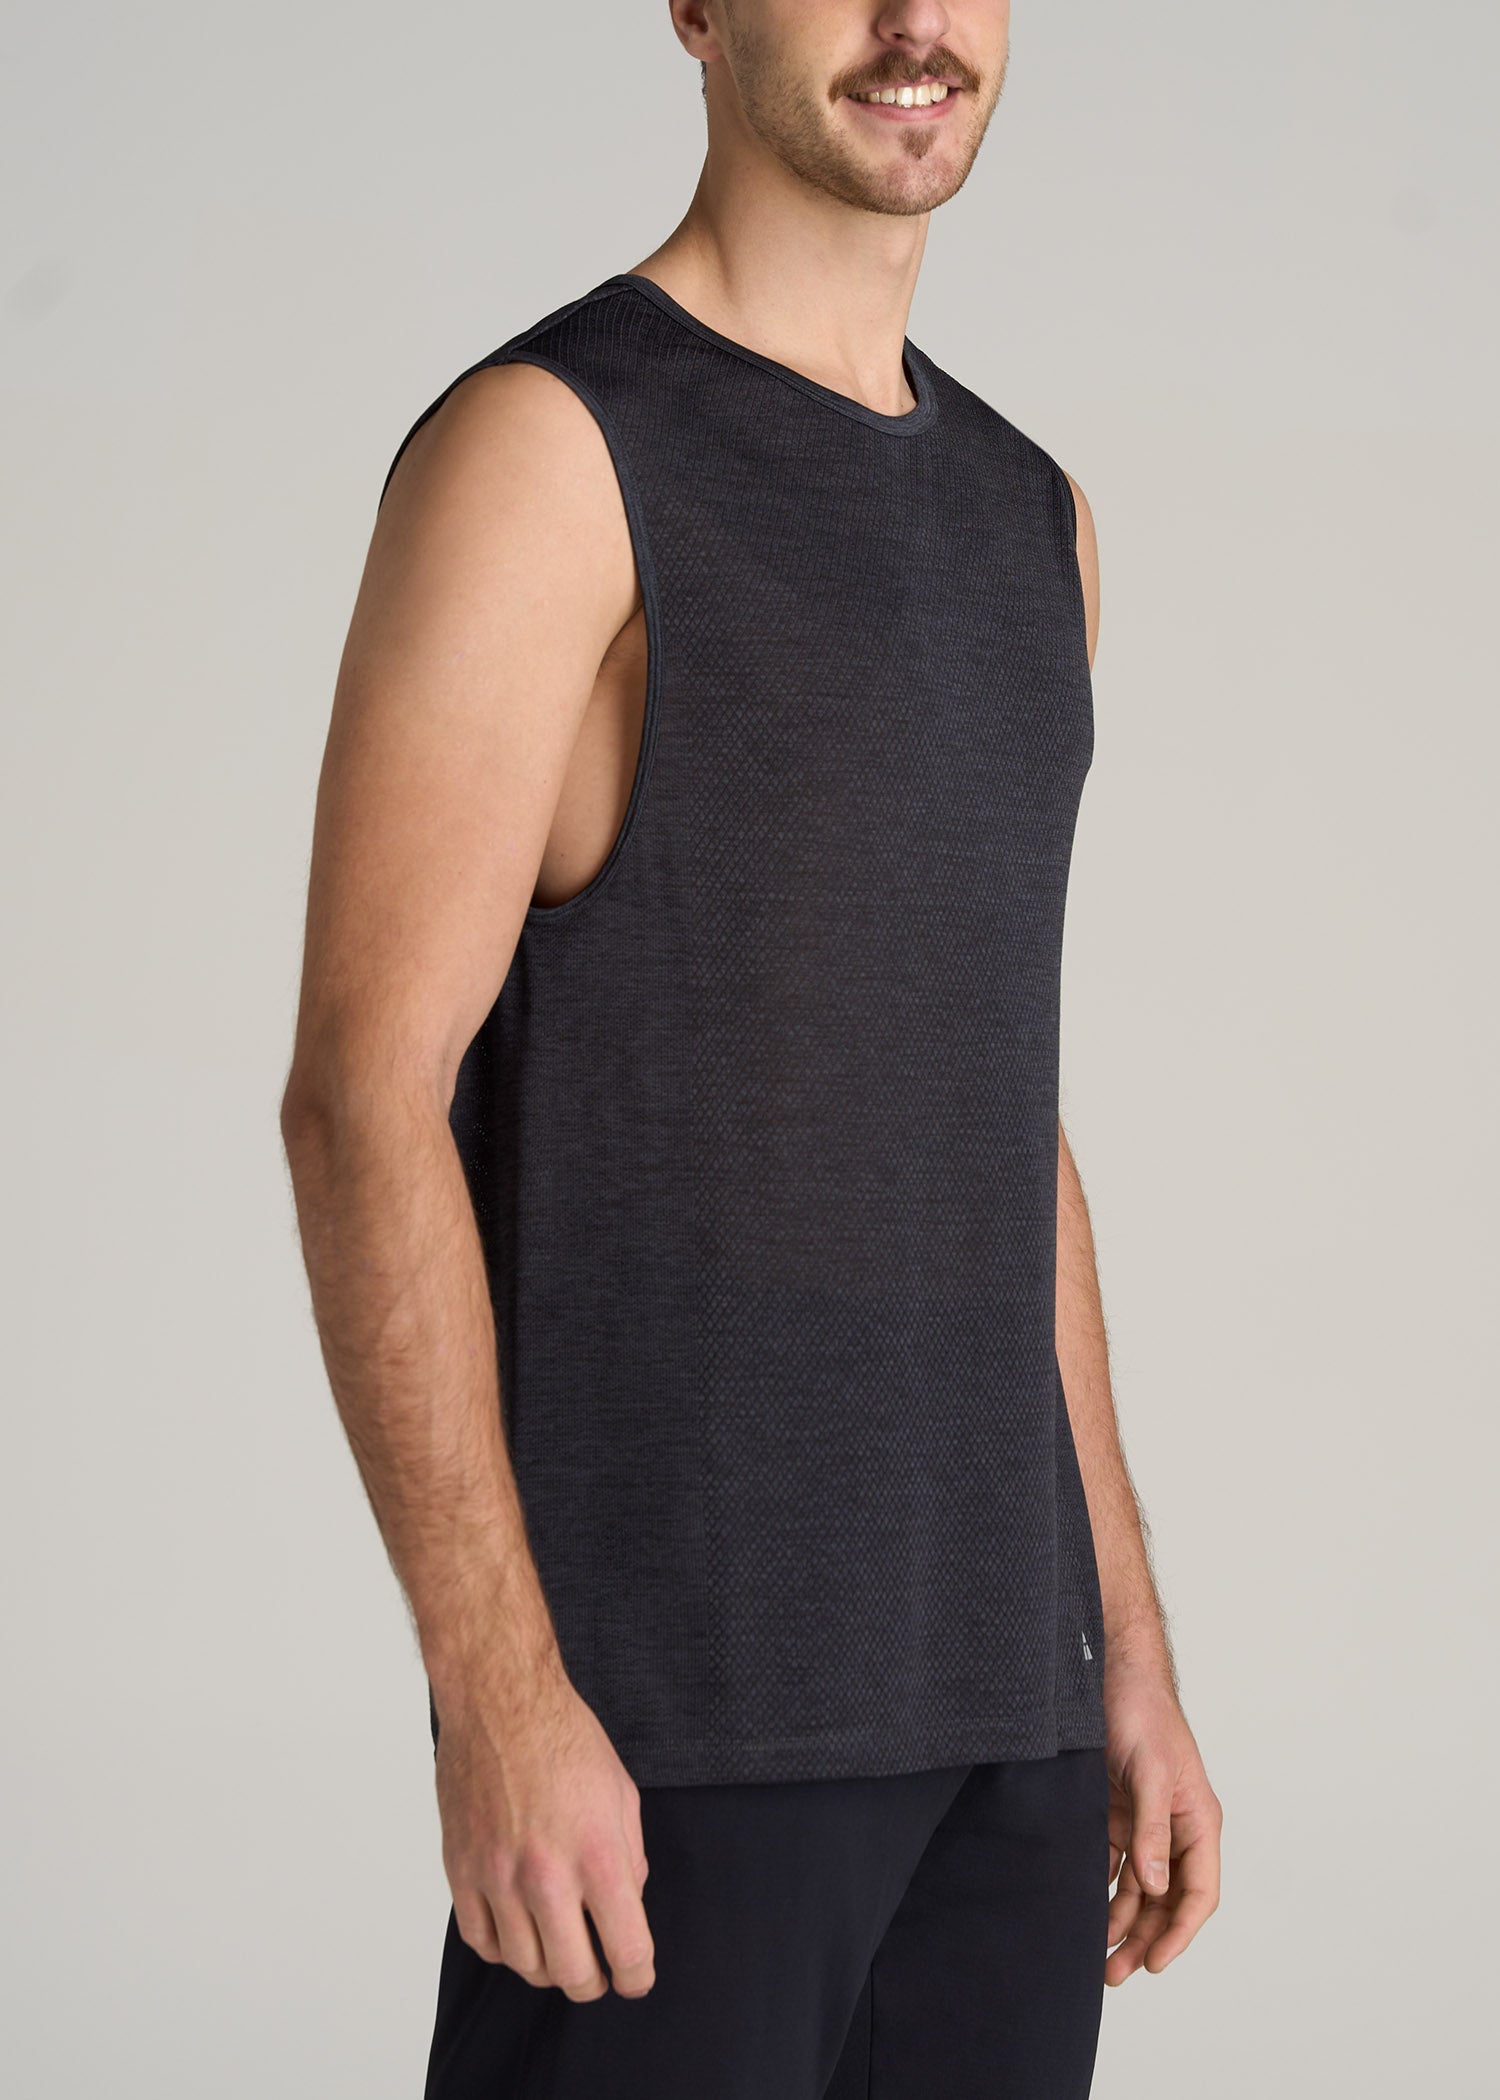     American-Tall-Men-Performance-SLIM-FIT-Engineered-Tank-Top-Charcoal-Mix-side